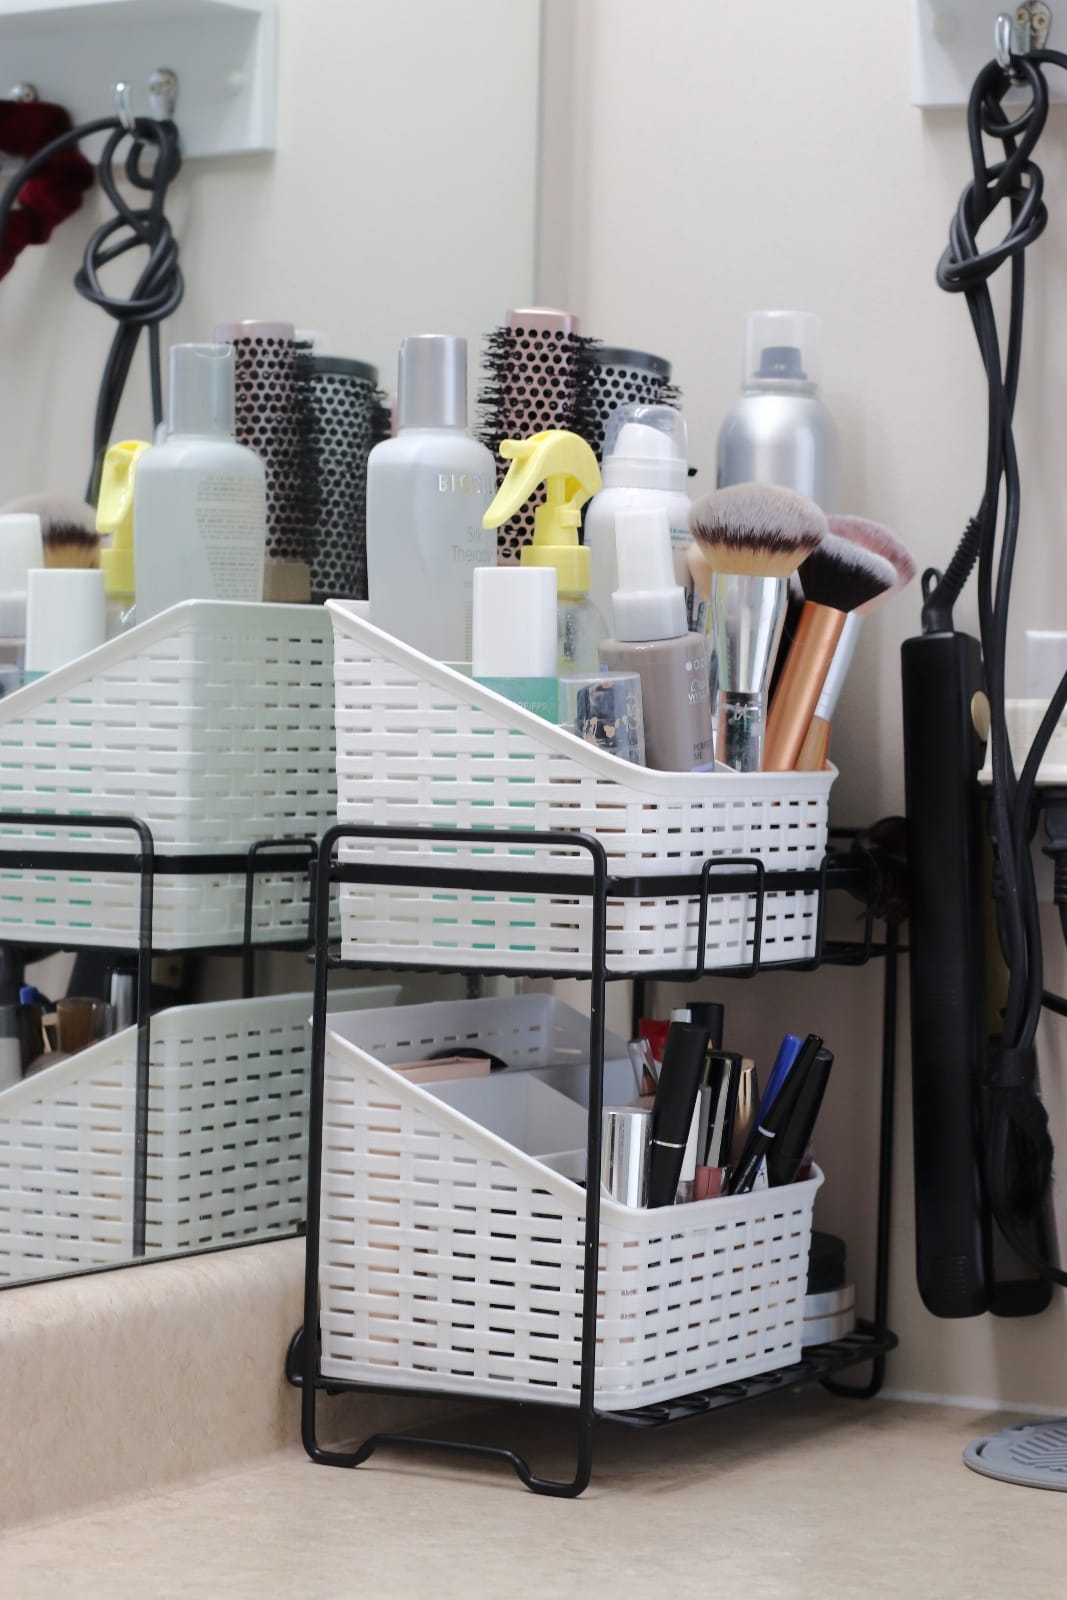 25 Bathroom Organizers Guaranteed to Help Keep Your Space Spotless